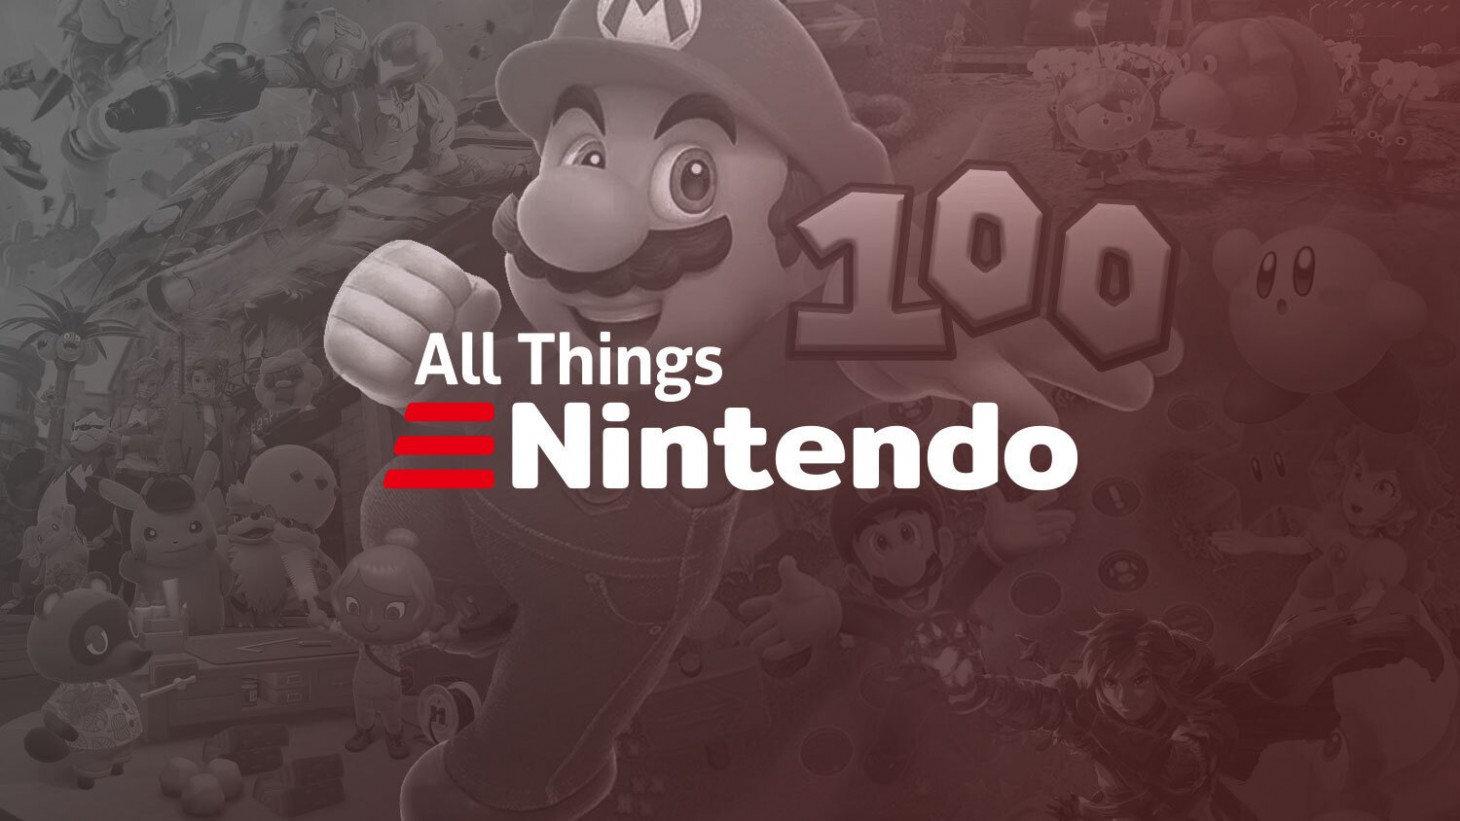 Nintendo Live 2023: Dates, Everything You Need To Know